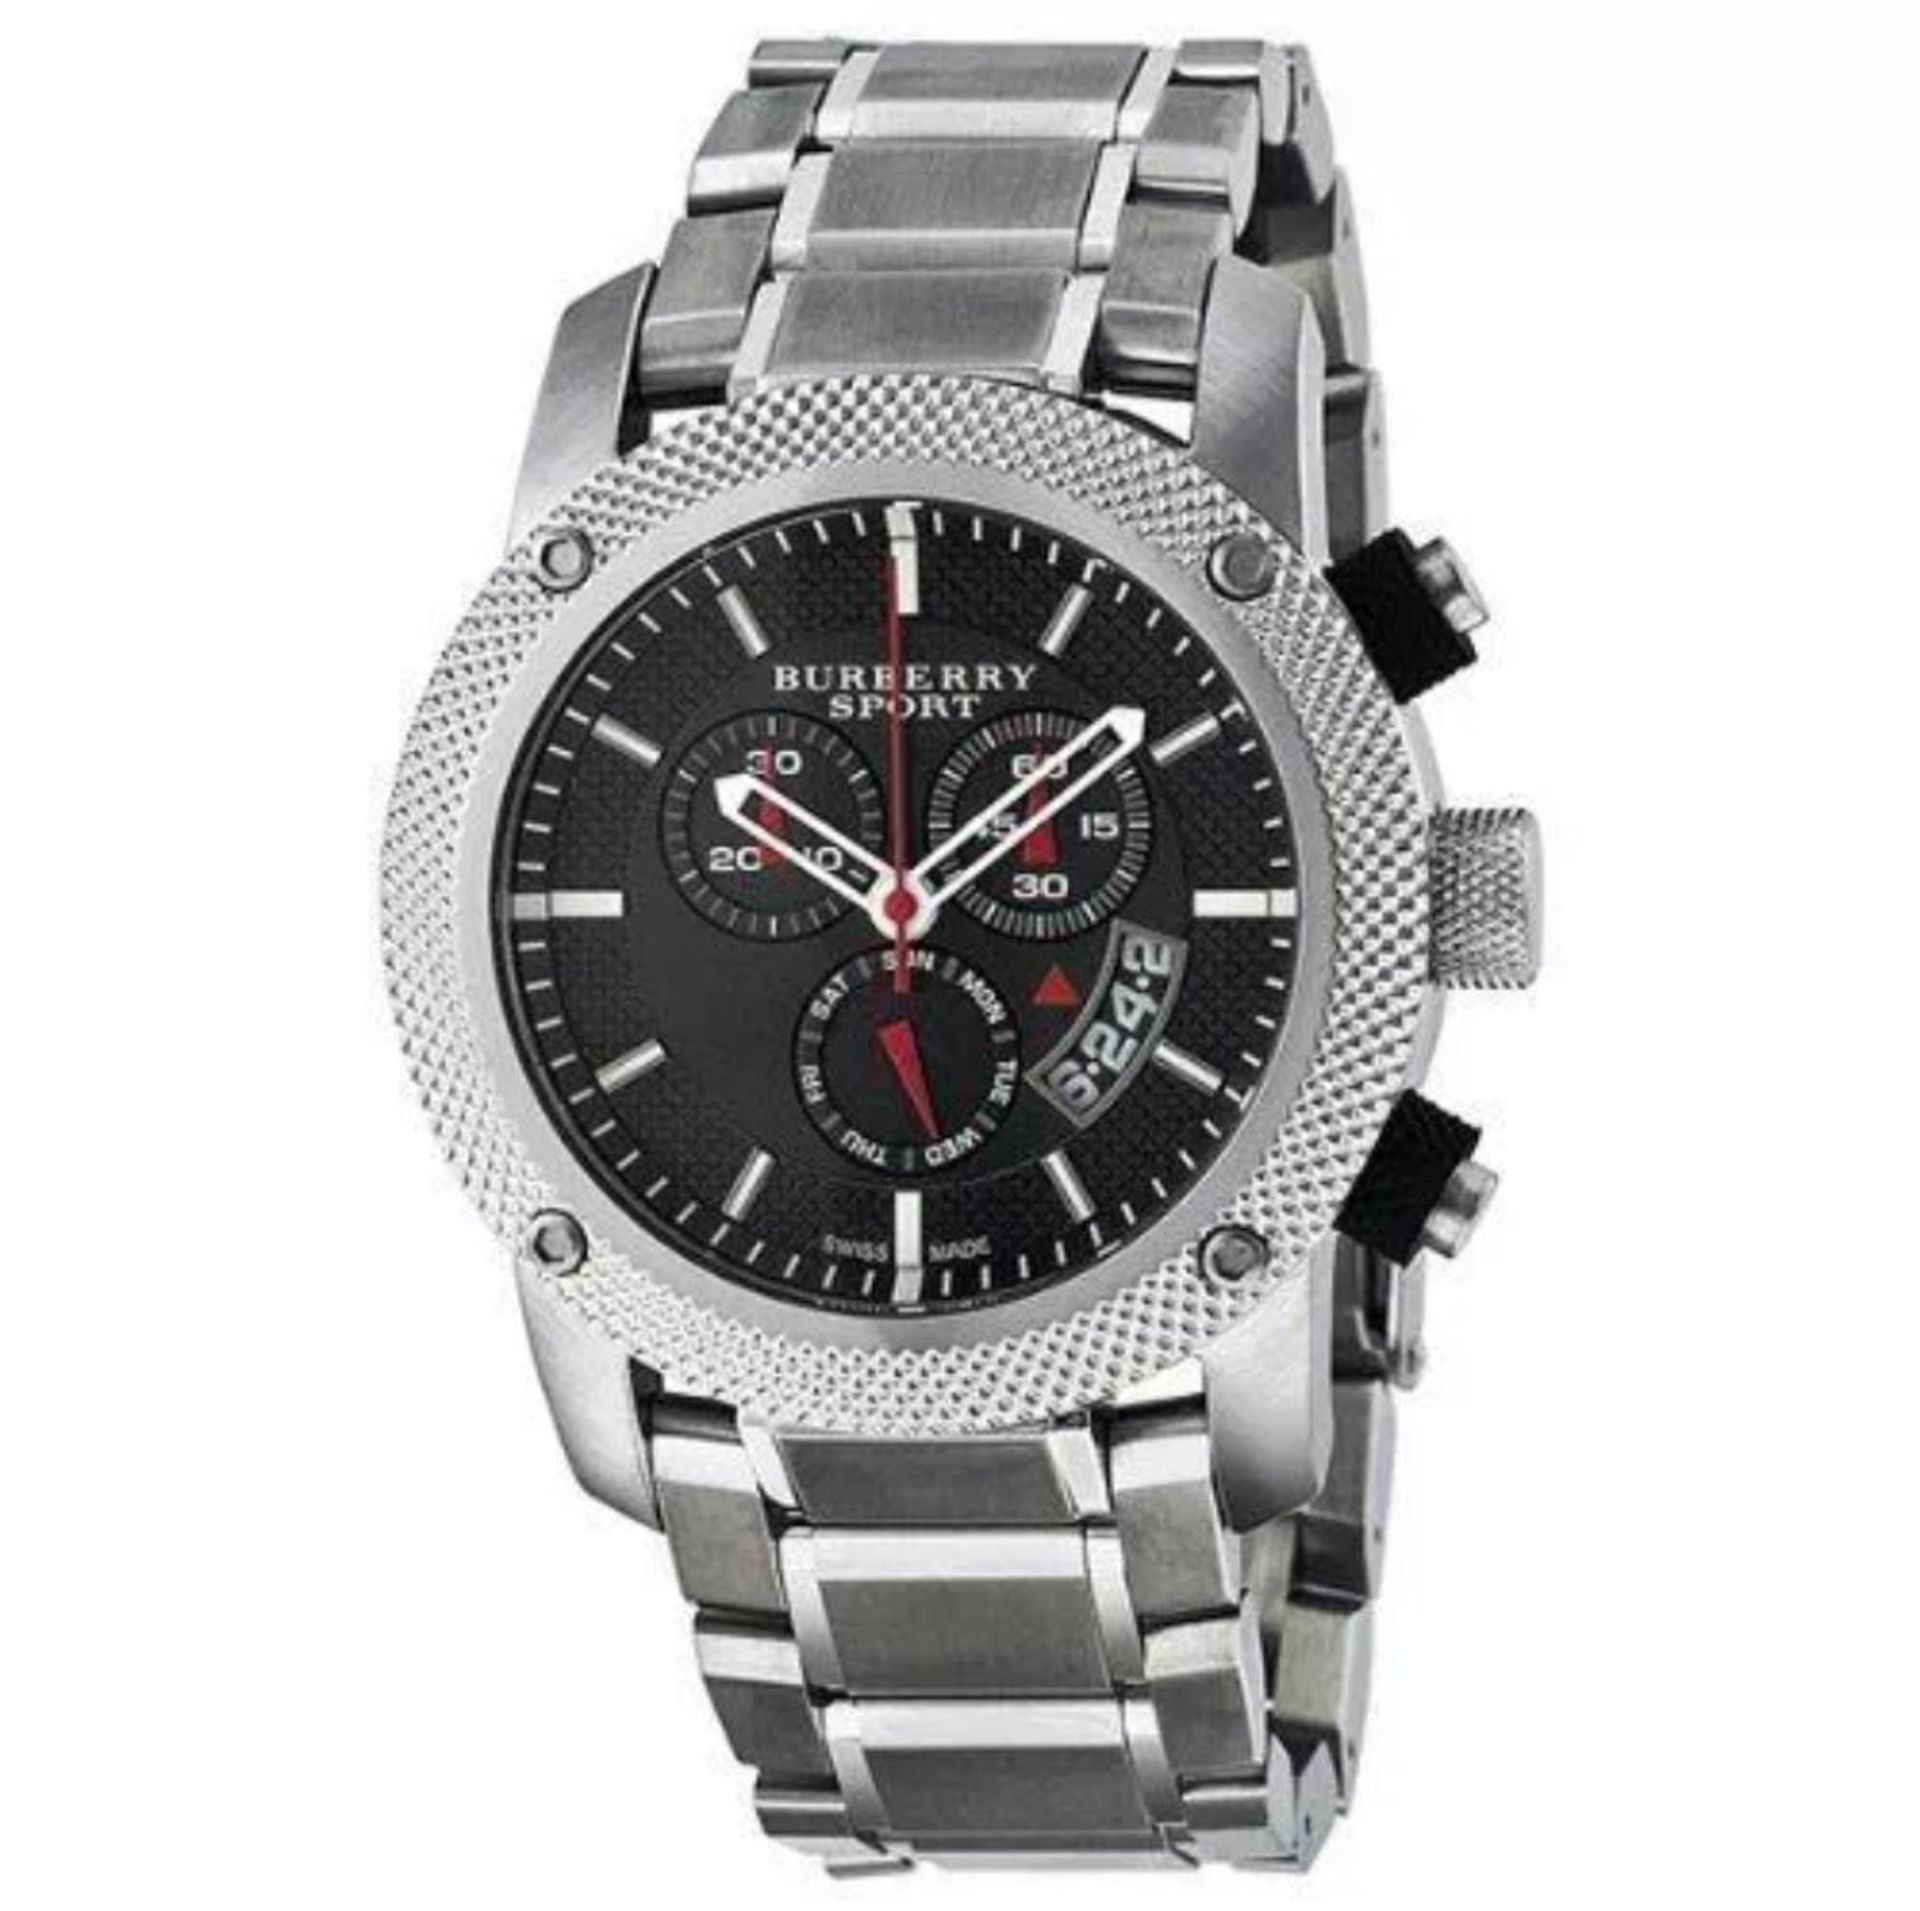 BRAND NEW BURBERRY BU7702,GENTS CHRONOGRAPH ROUND DIAL SPORTS WATCH, WITH A BLACK DIAL AND SILVER